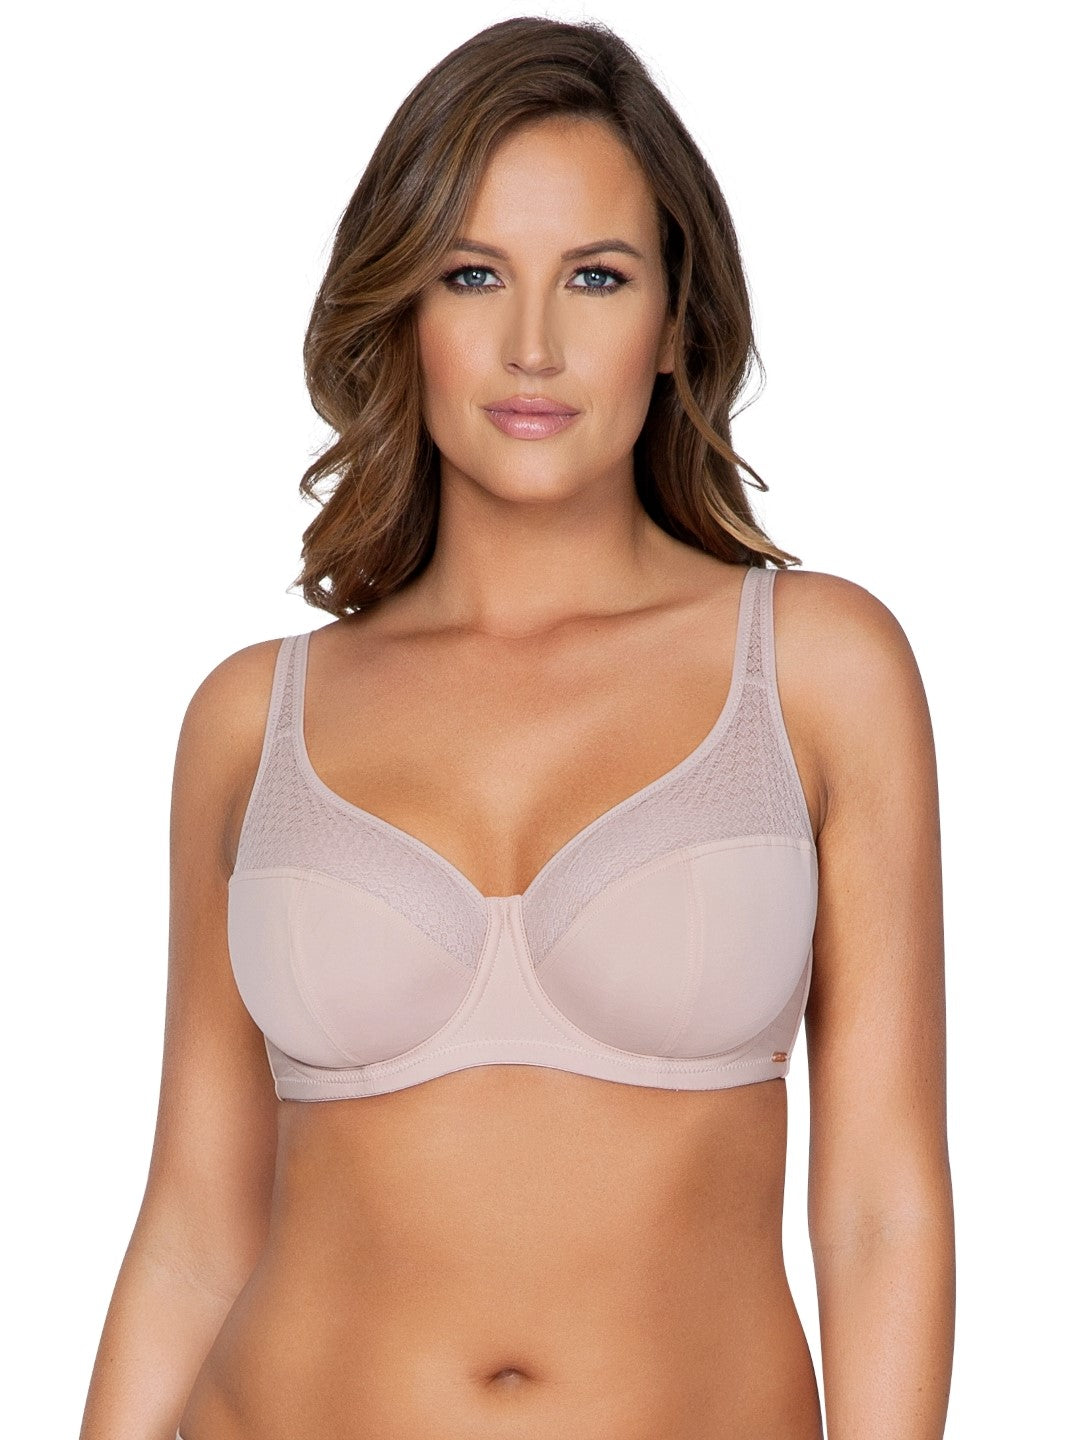 43% OFF on Sherry Beige Lycra Lace Non-padded Bra on Snapdeal